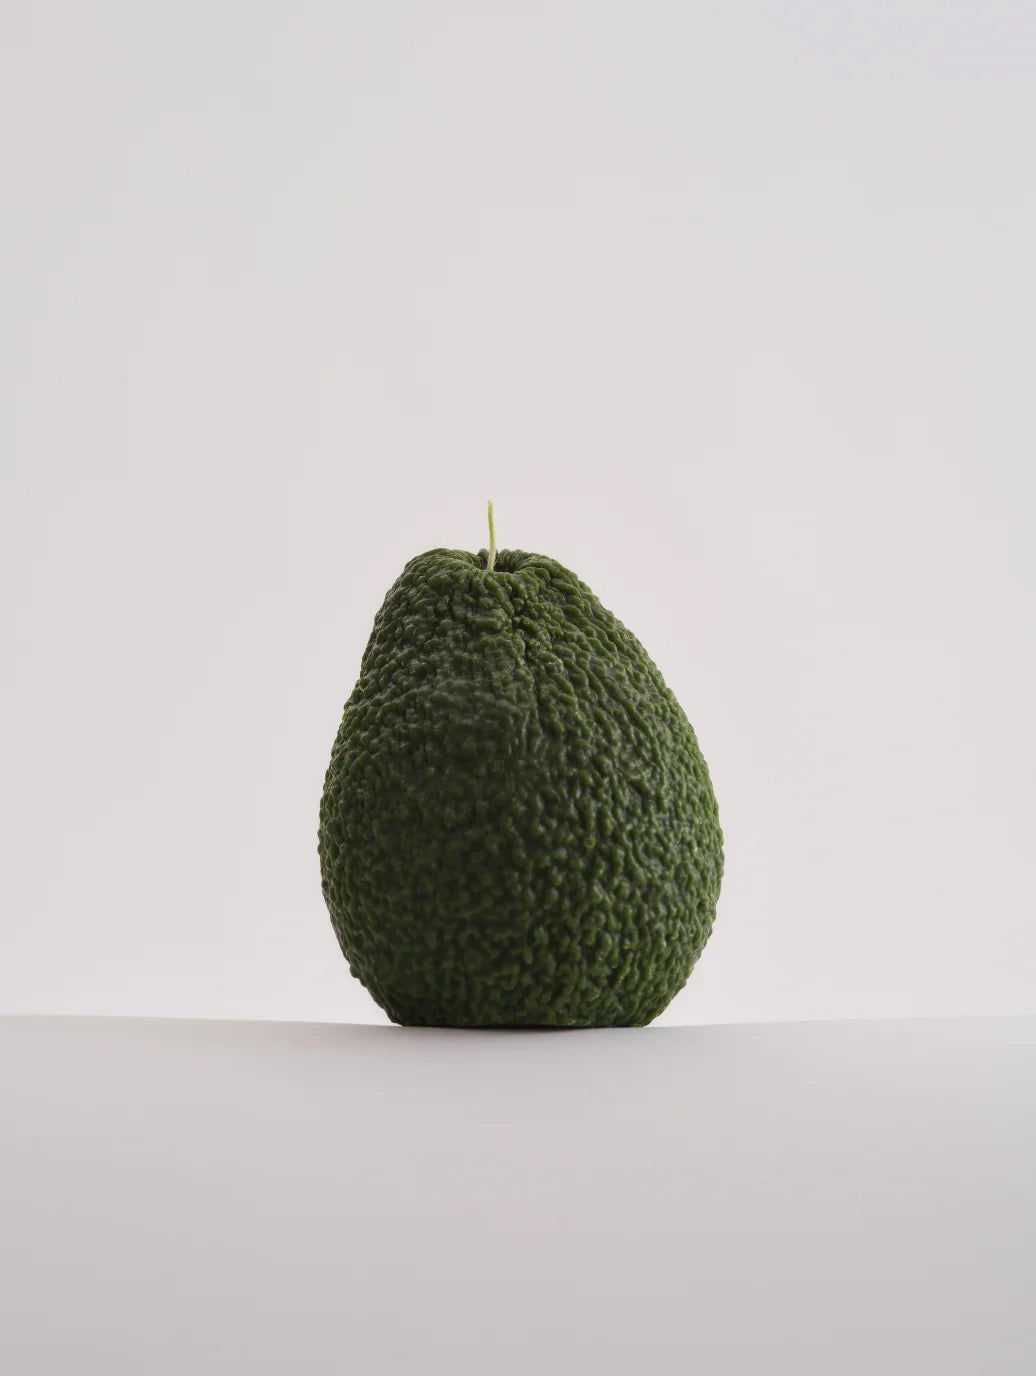 A hand-made Nonna's Grocer Avocado Candle – Small crafted from a soy wax blend, delicately placed on a white surface.